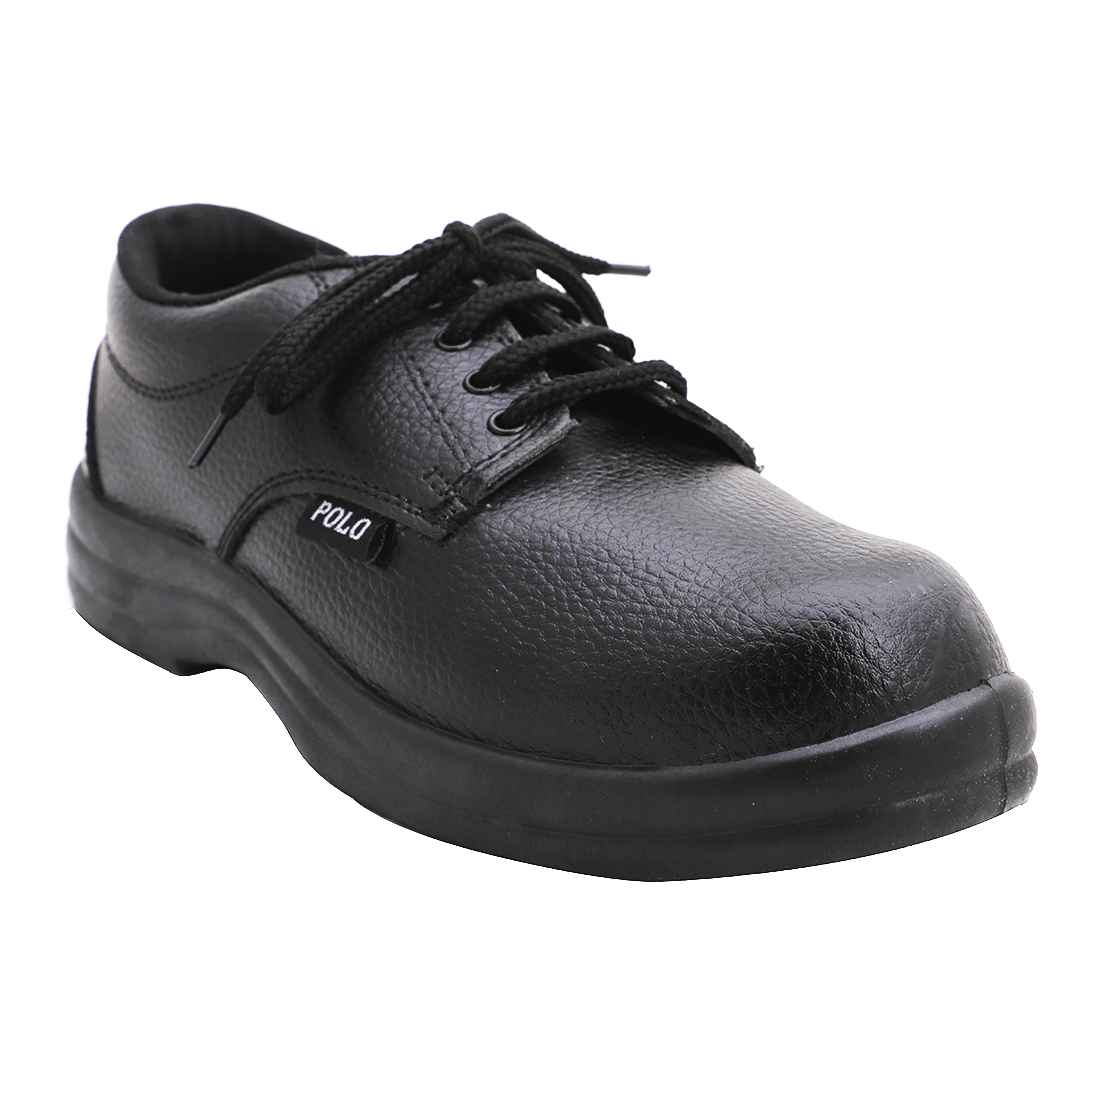 indcare safety shoes